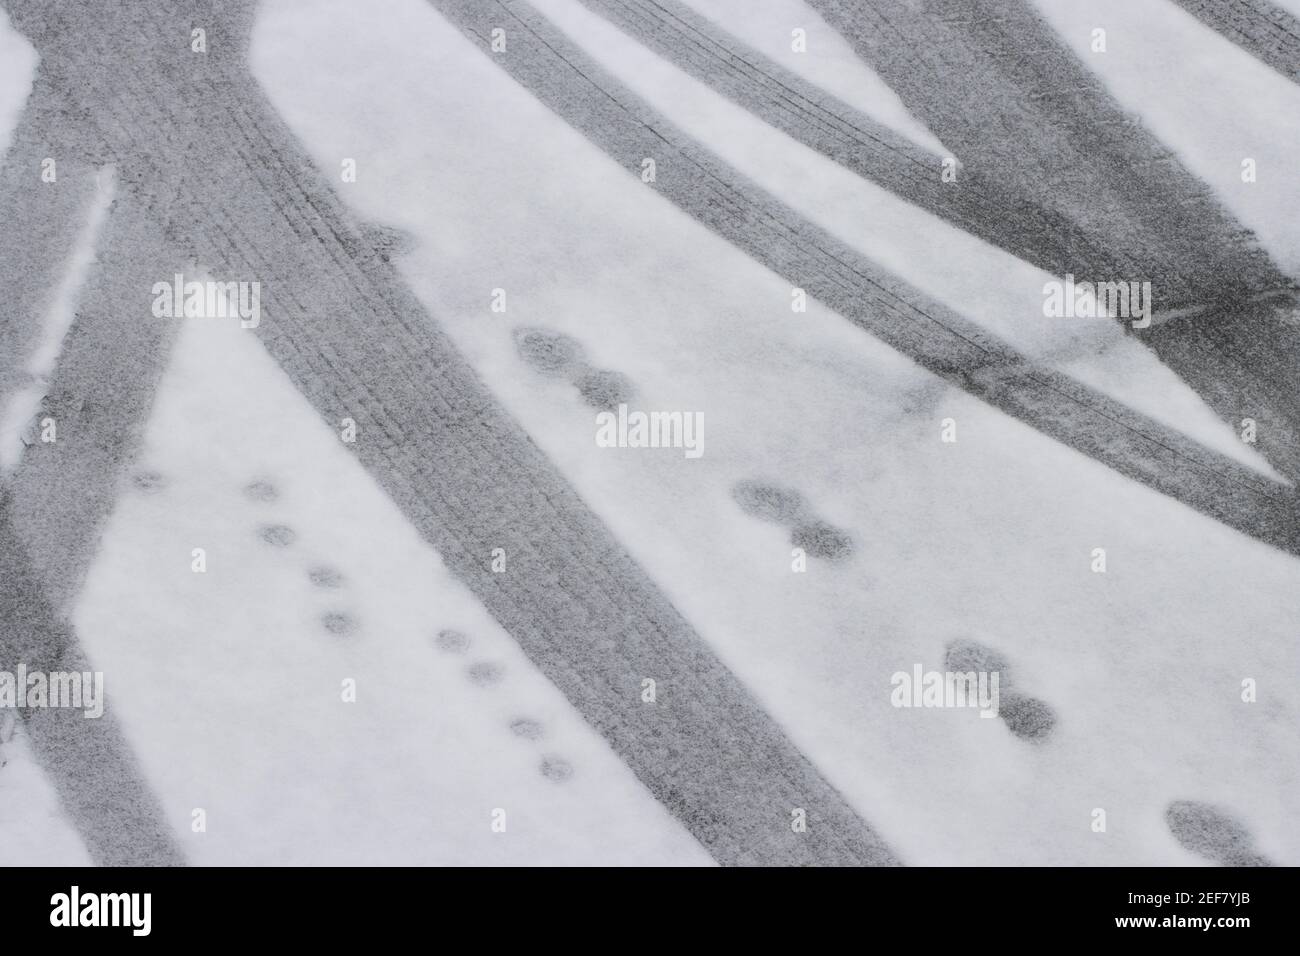 Car tracks and footprints in the snow. Stock Photo